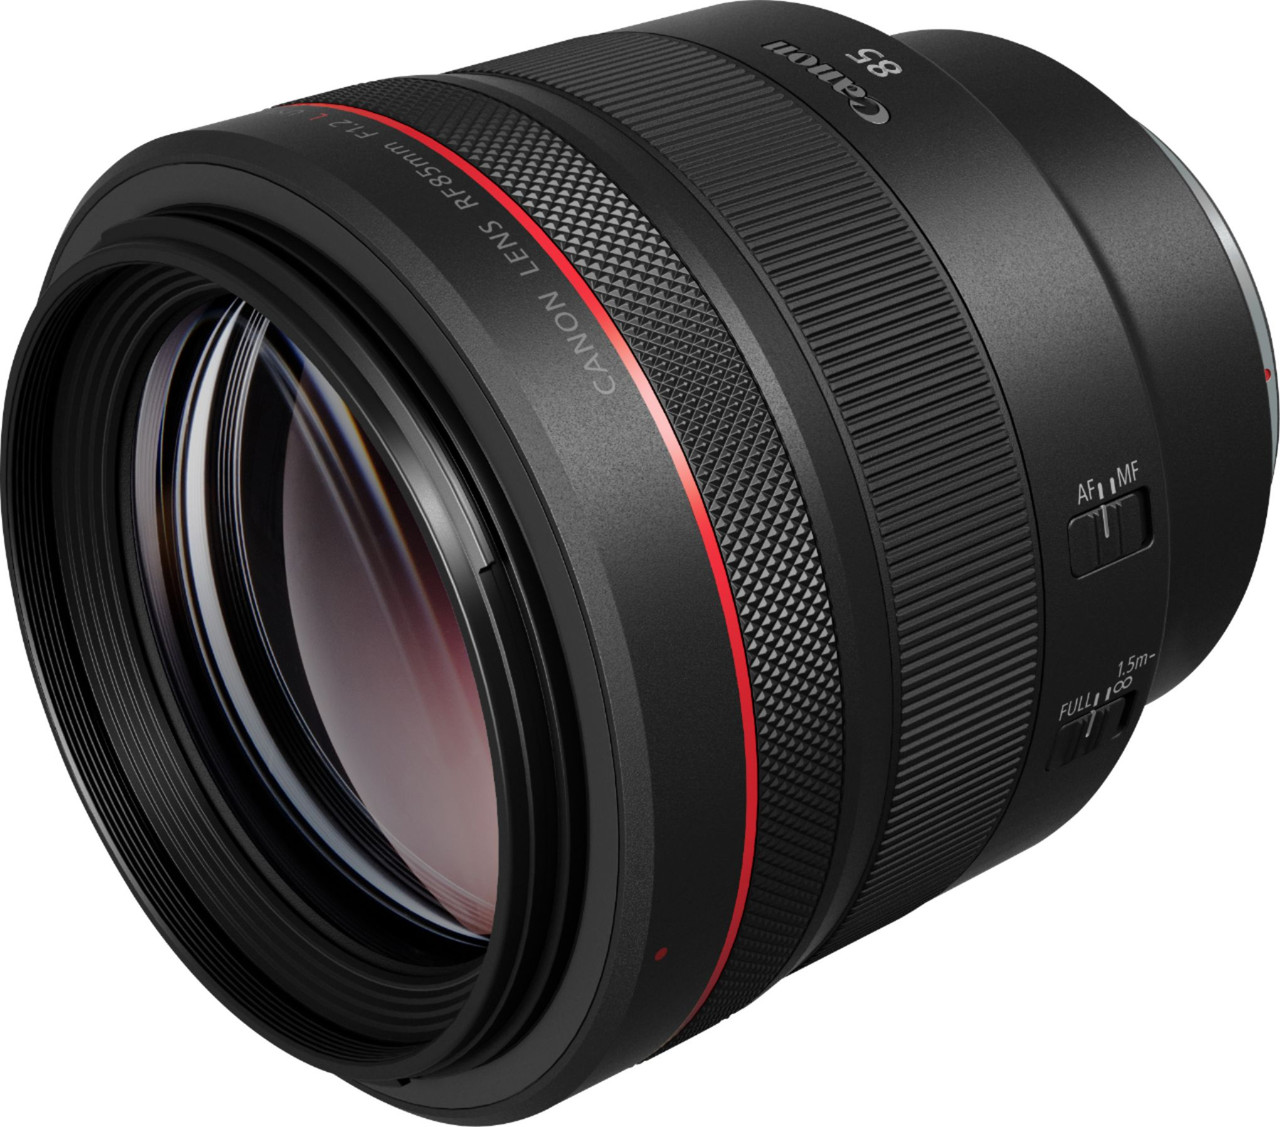 Canon - RF 85mm F1.2 L USM Mid-Telephoto Prime Lens for Canon EOS R and EOS RP Cameras